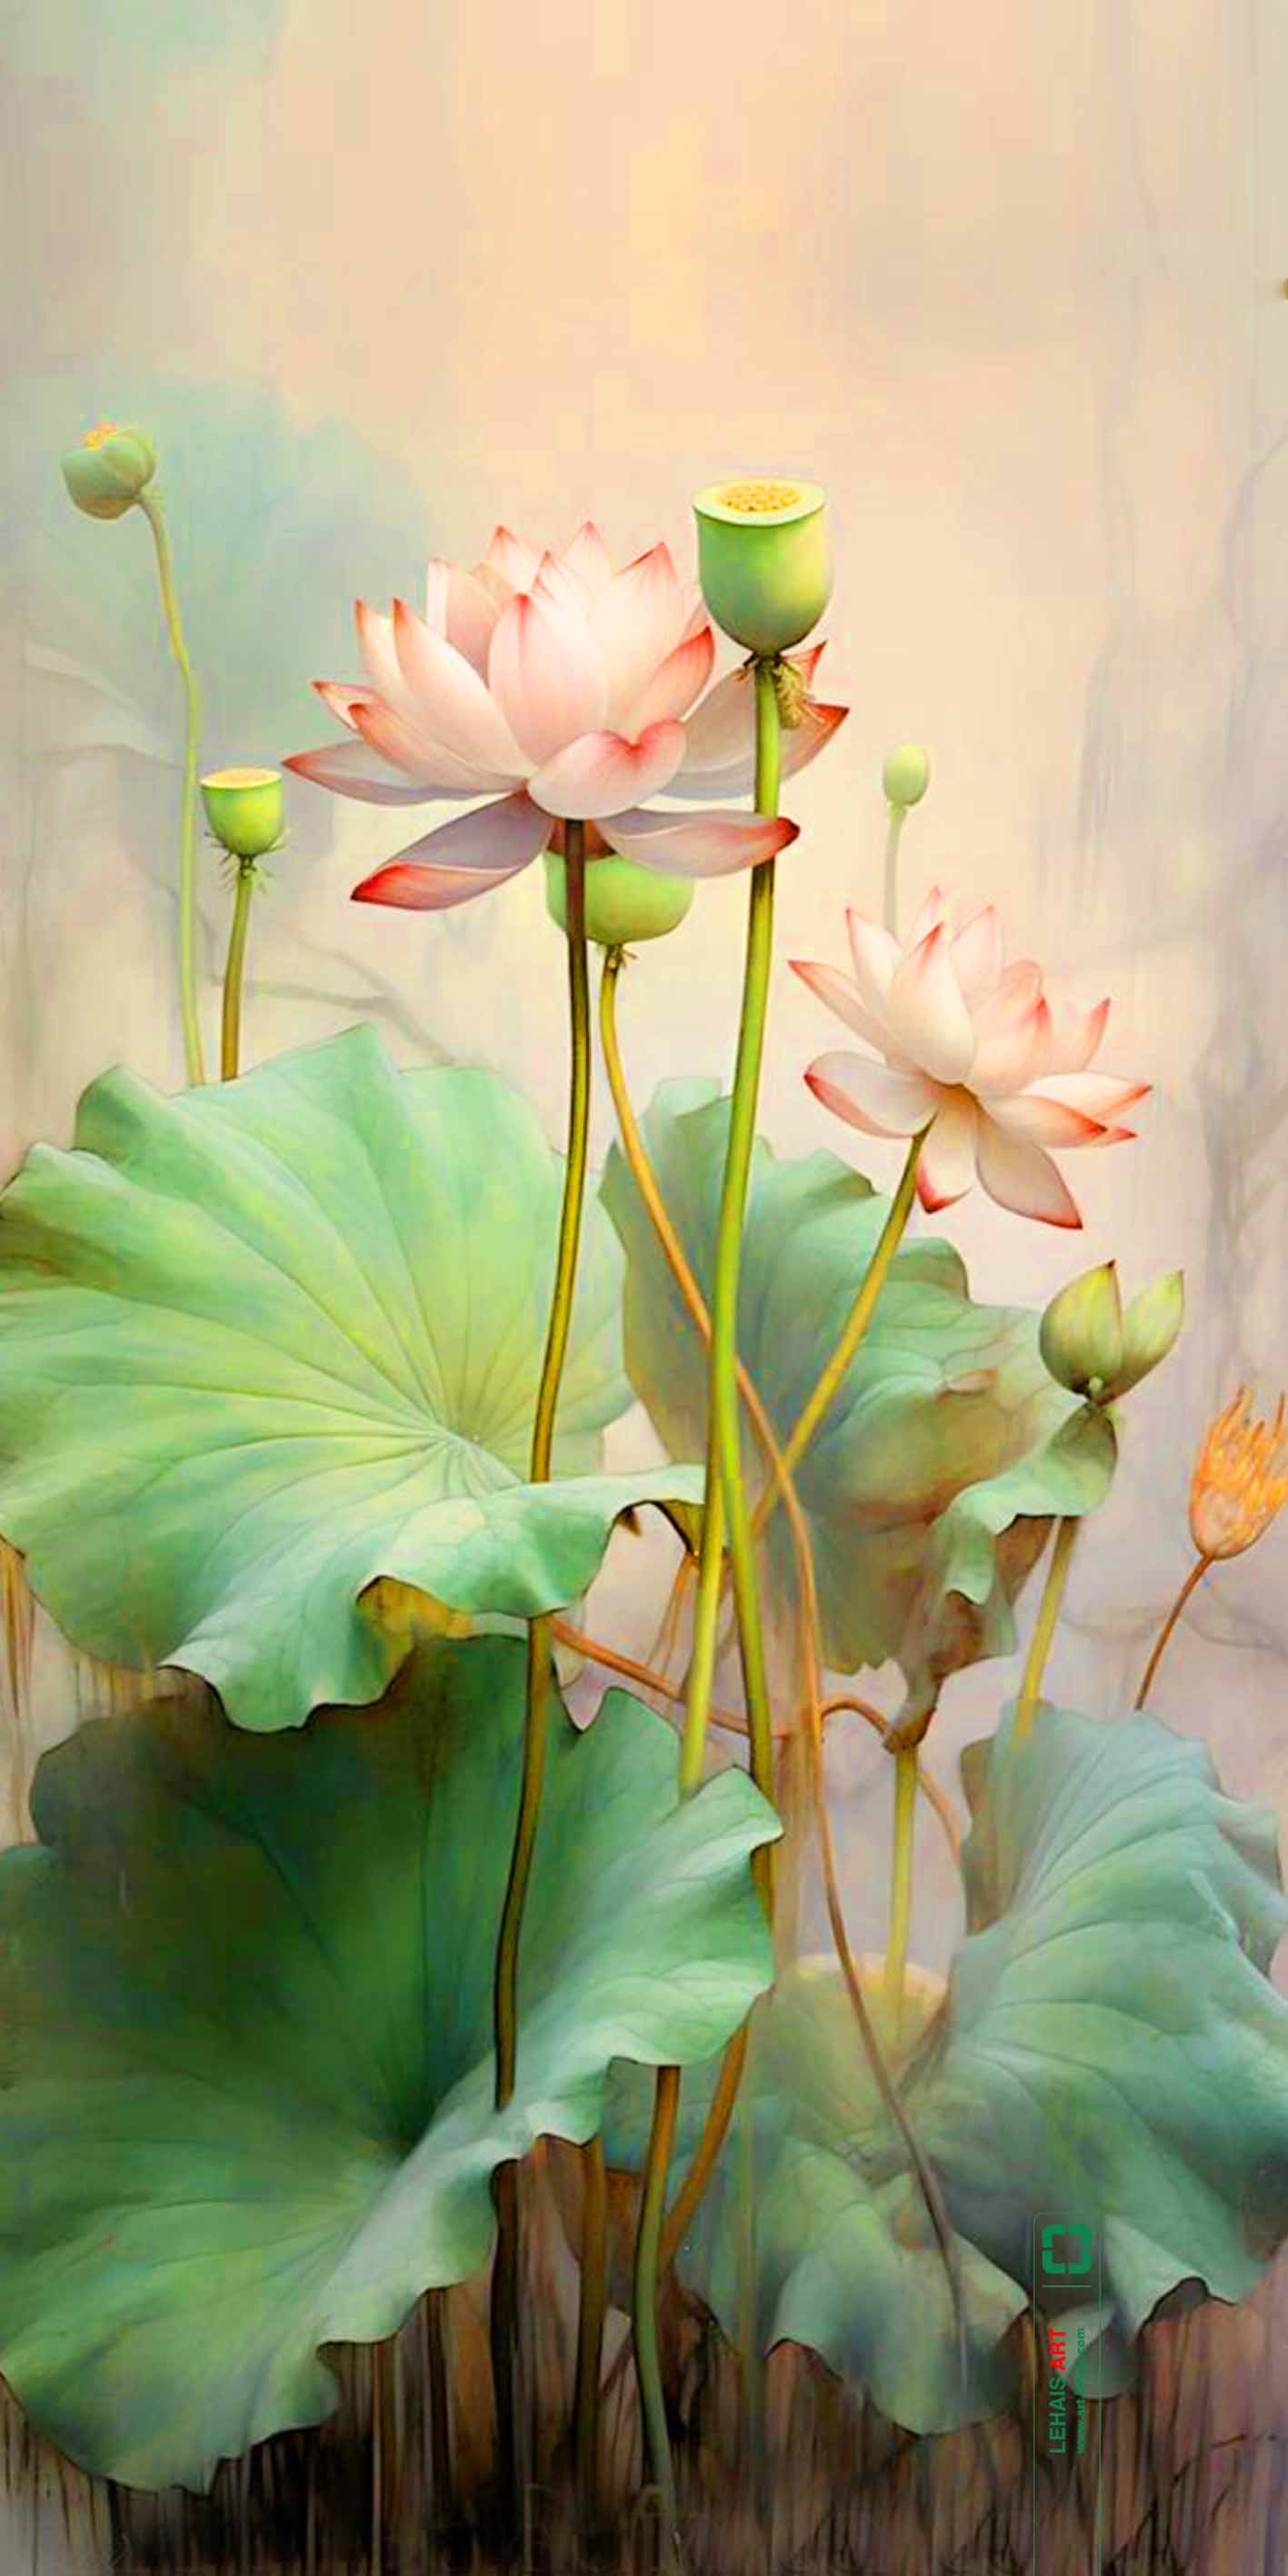 Oil painting of lotus flowers realistically depicted in Modern style - TSD759LHAR